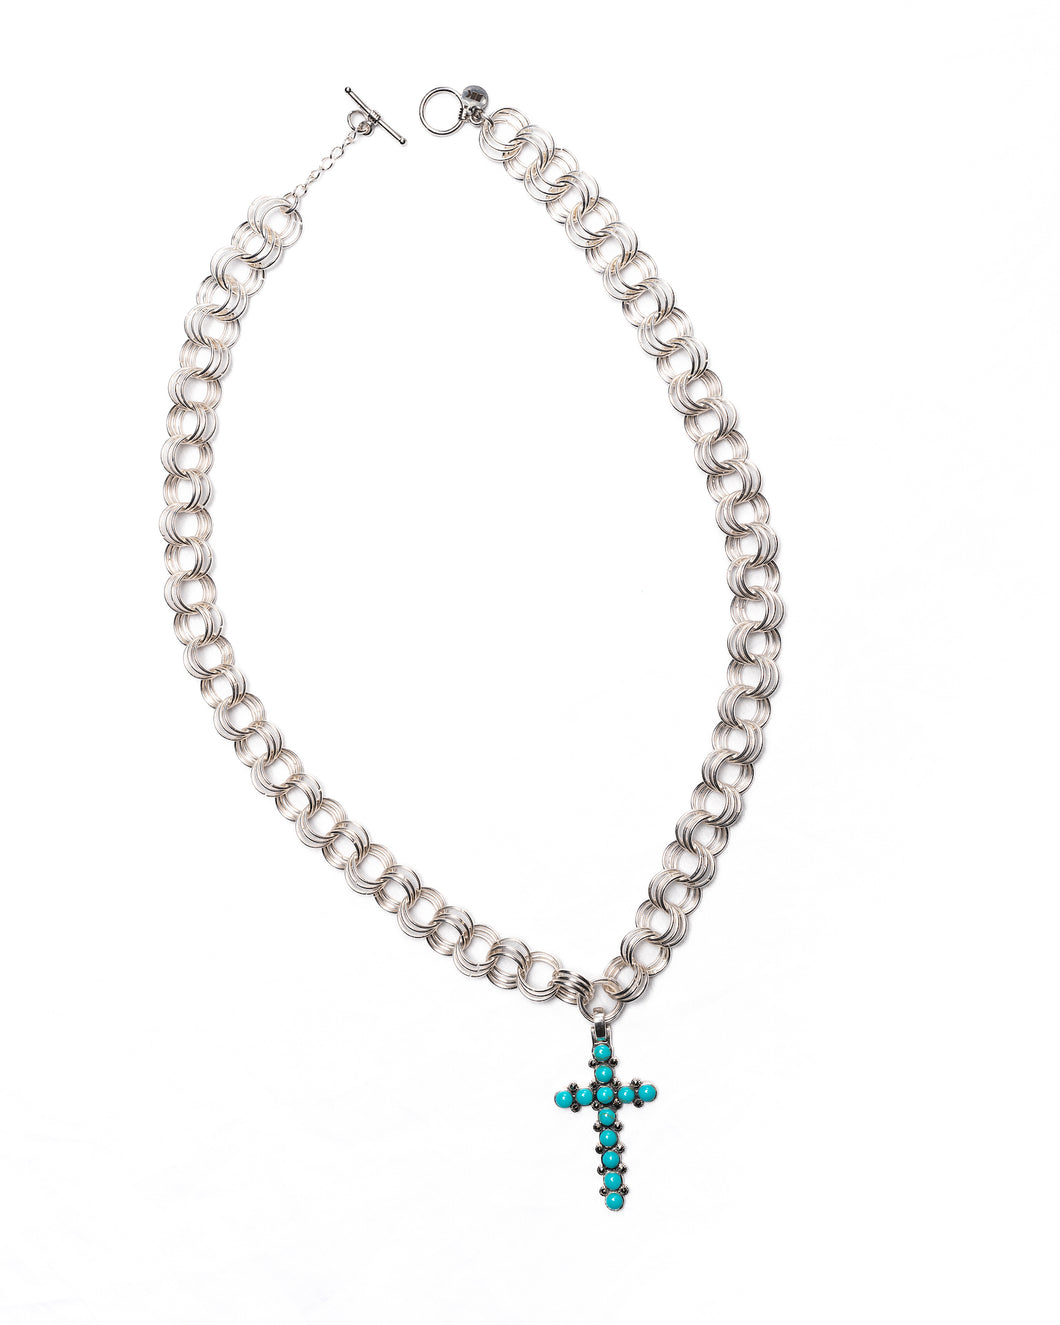 The Kyna Necklace - Turquoise Cross